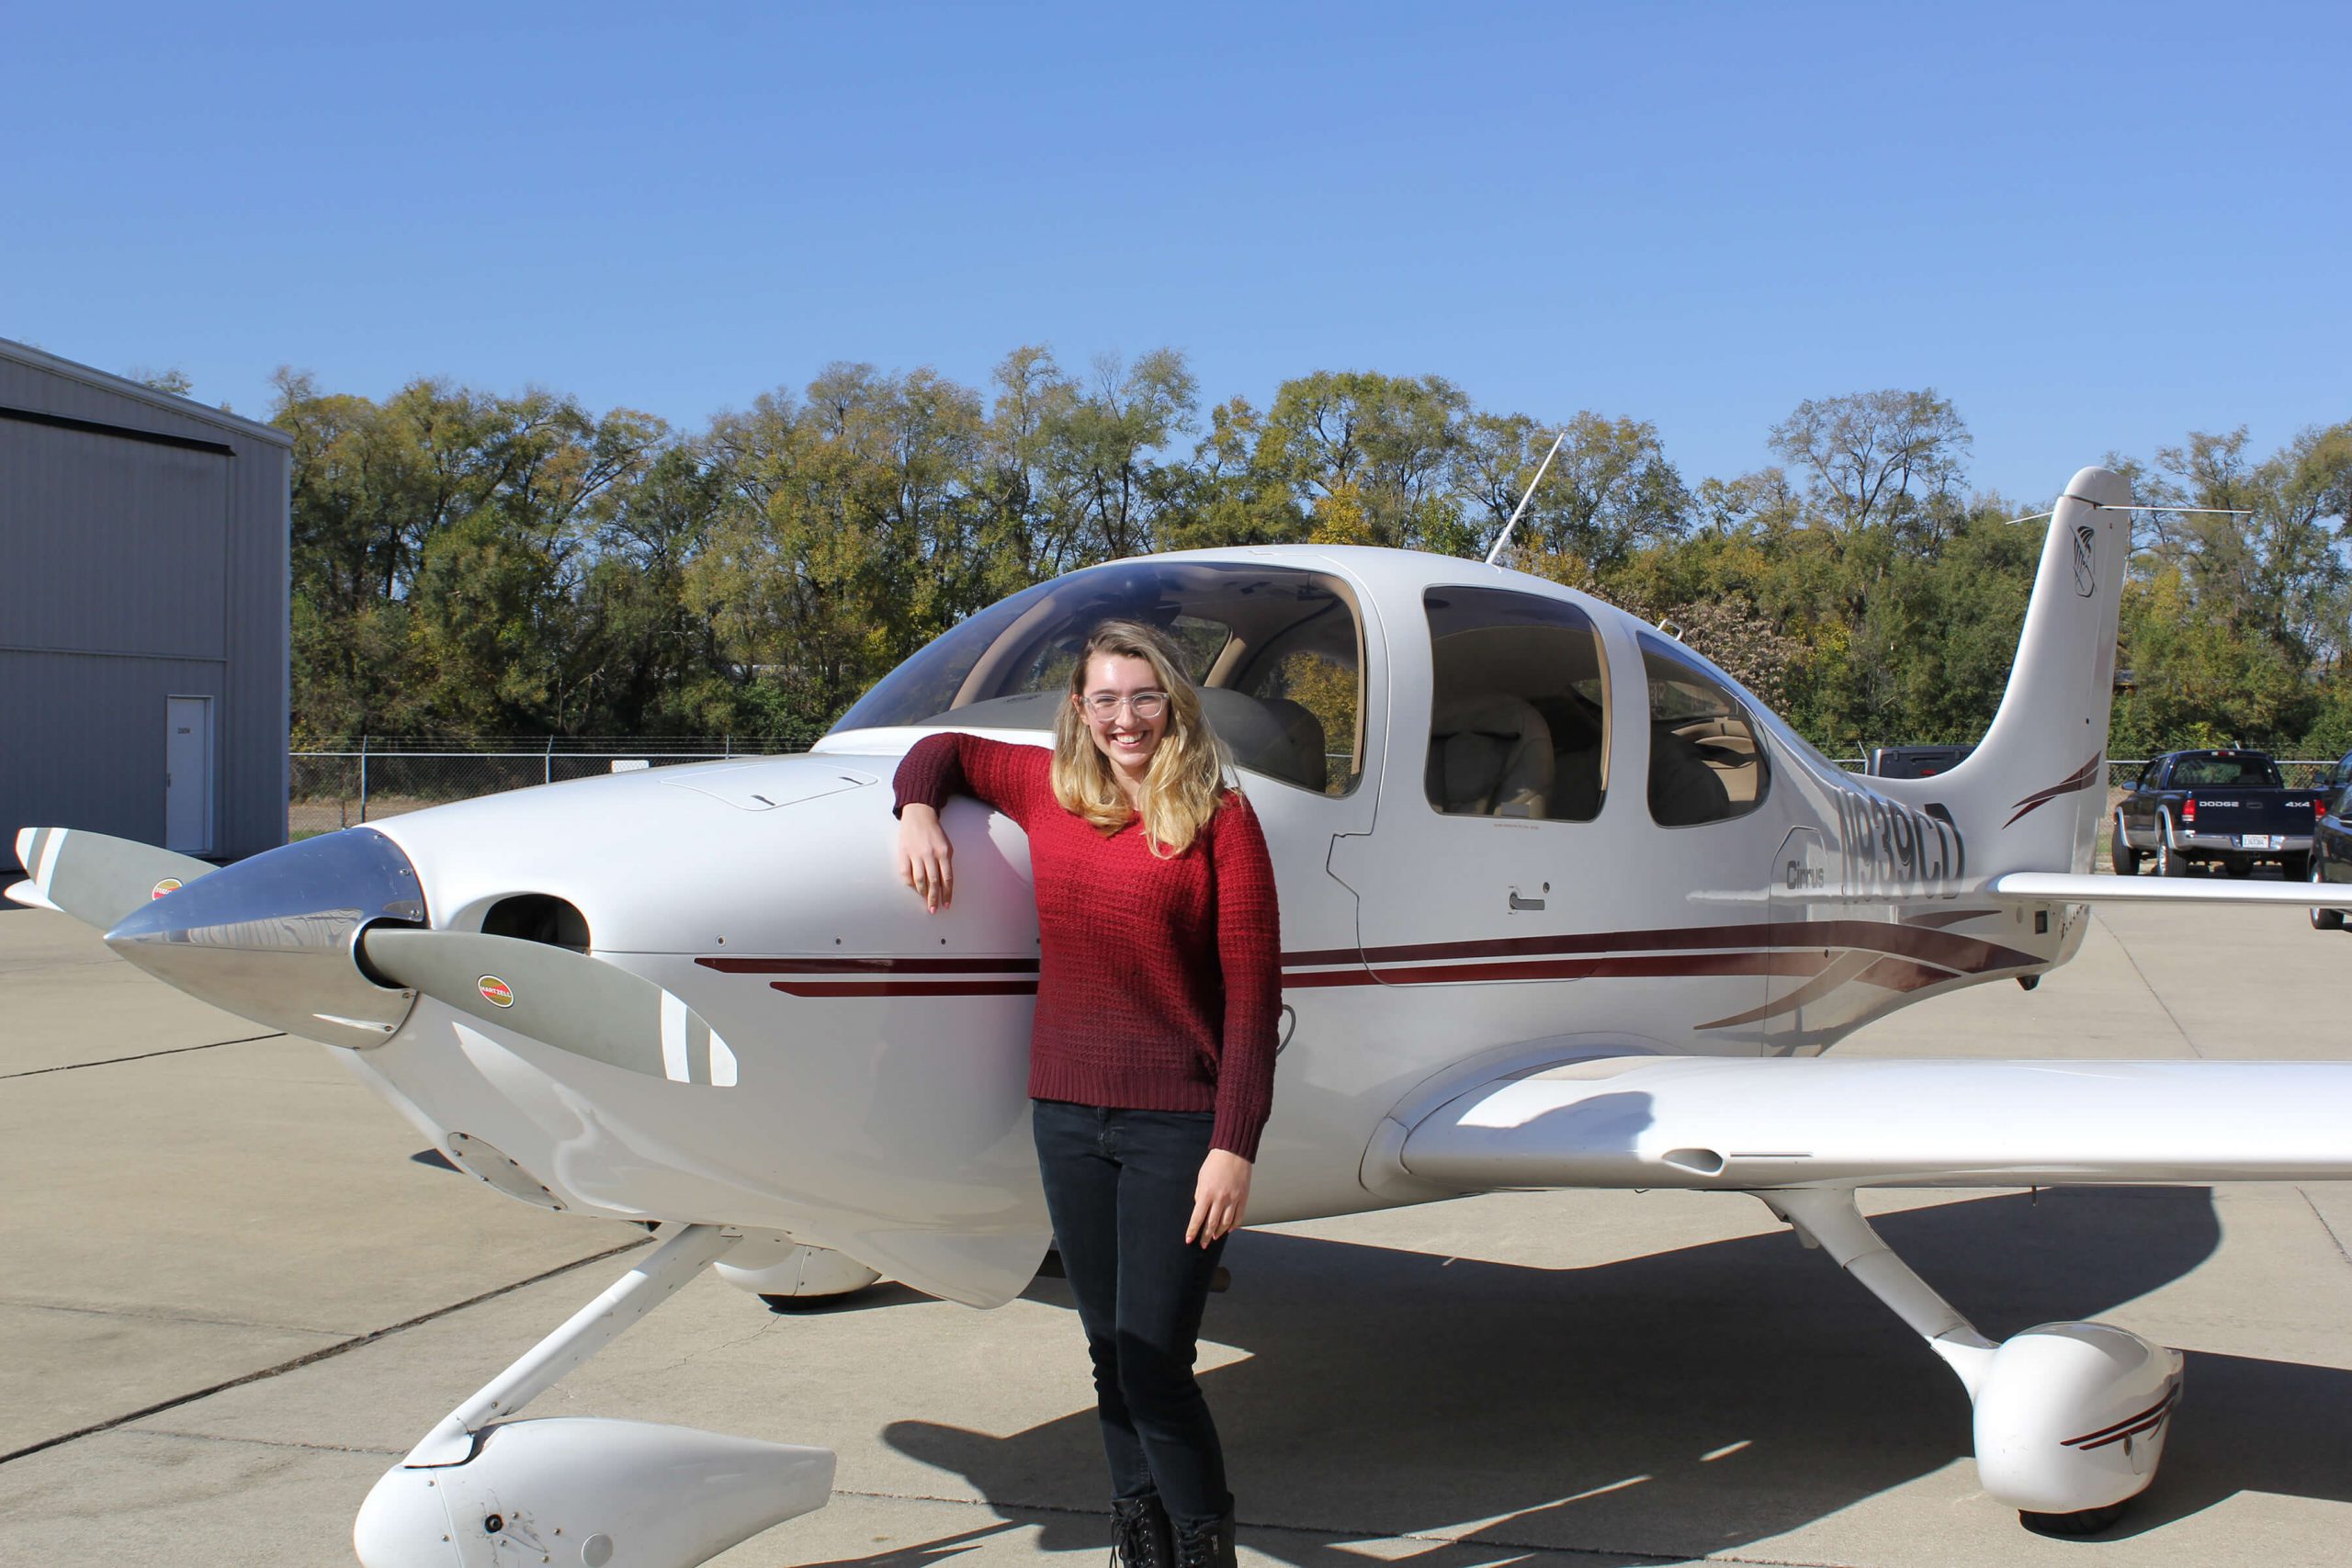 Southwestern Illinois College Aviation student with plane